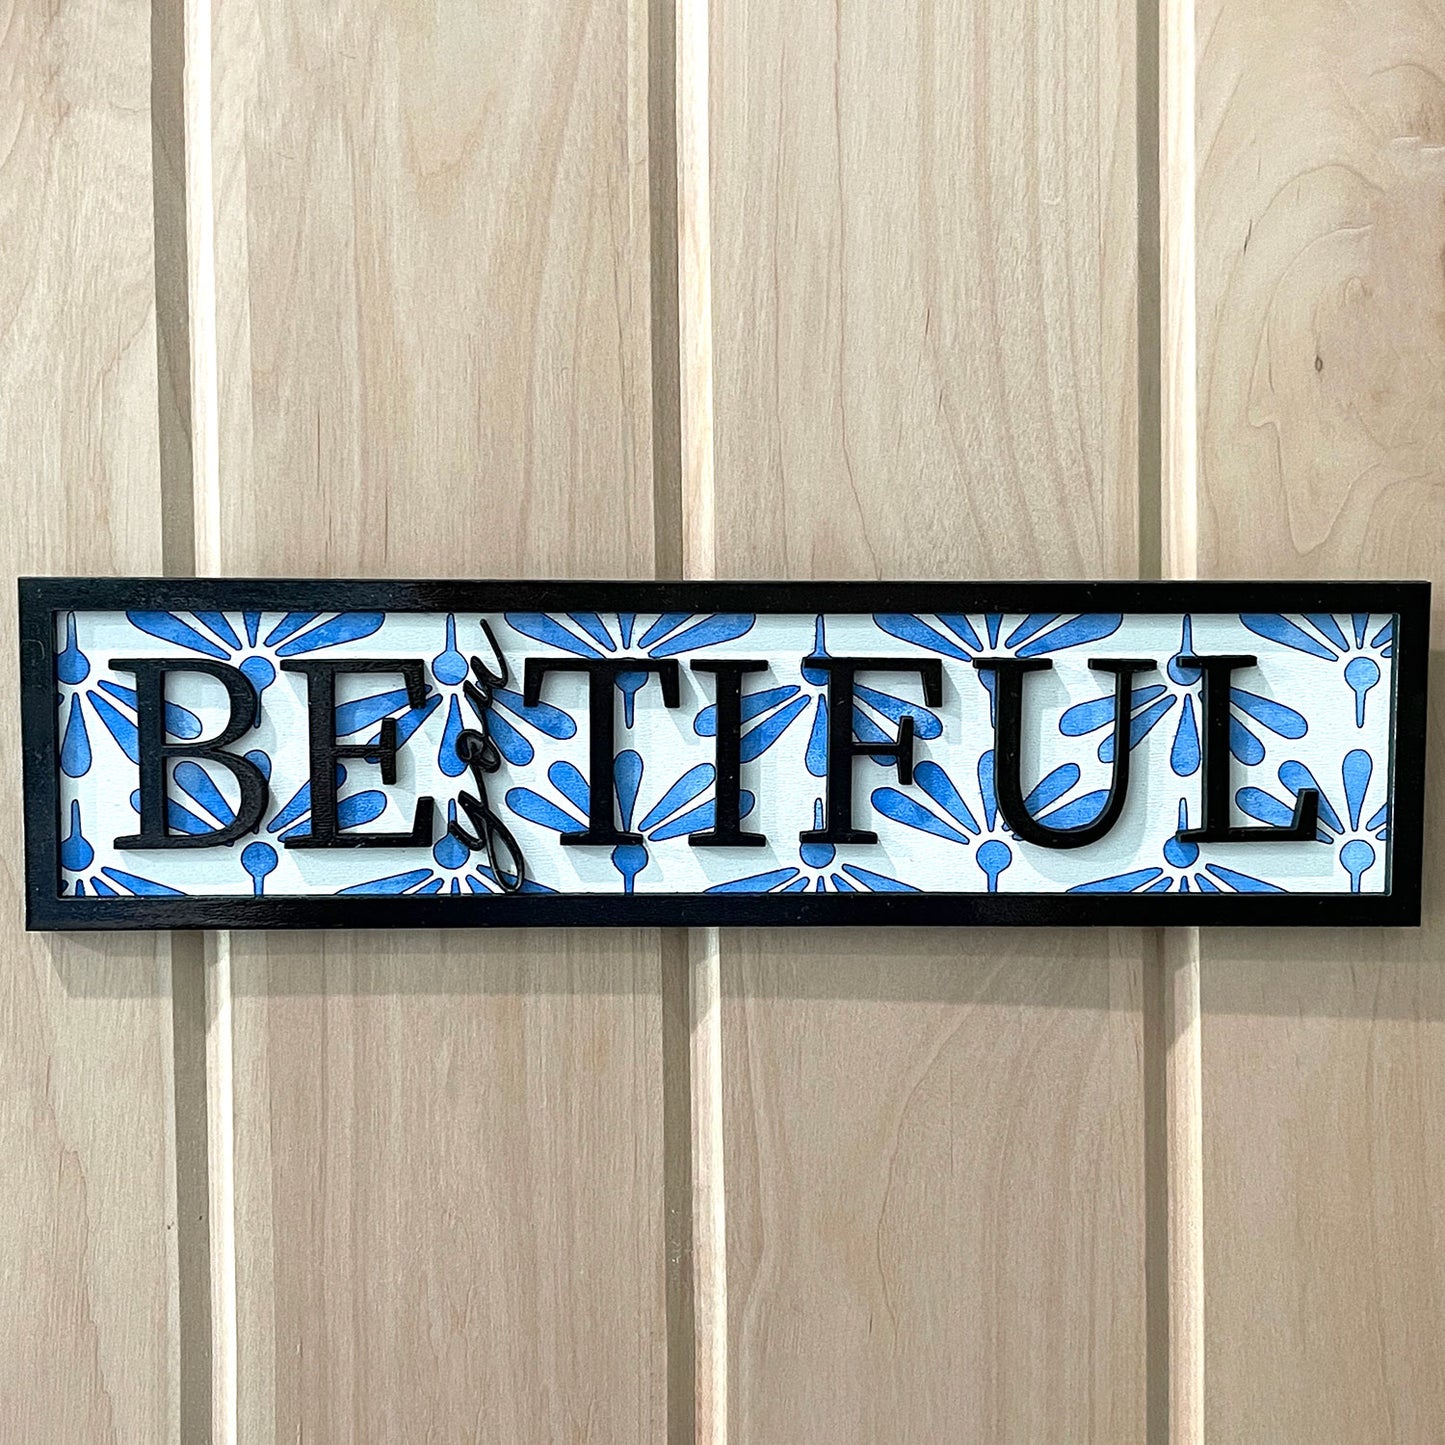 Be-you-tiful Wall Sign